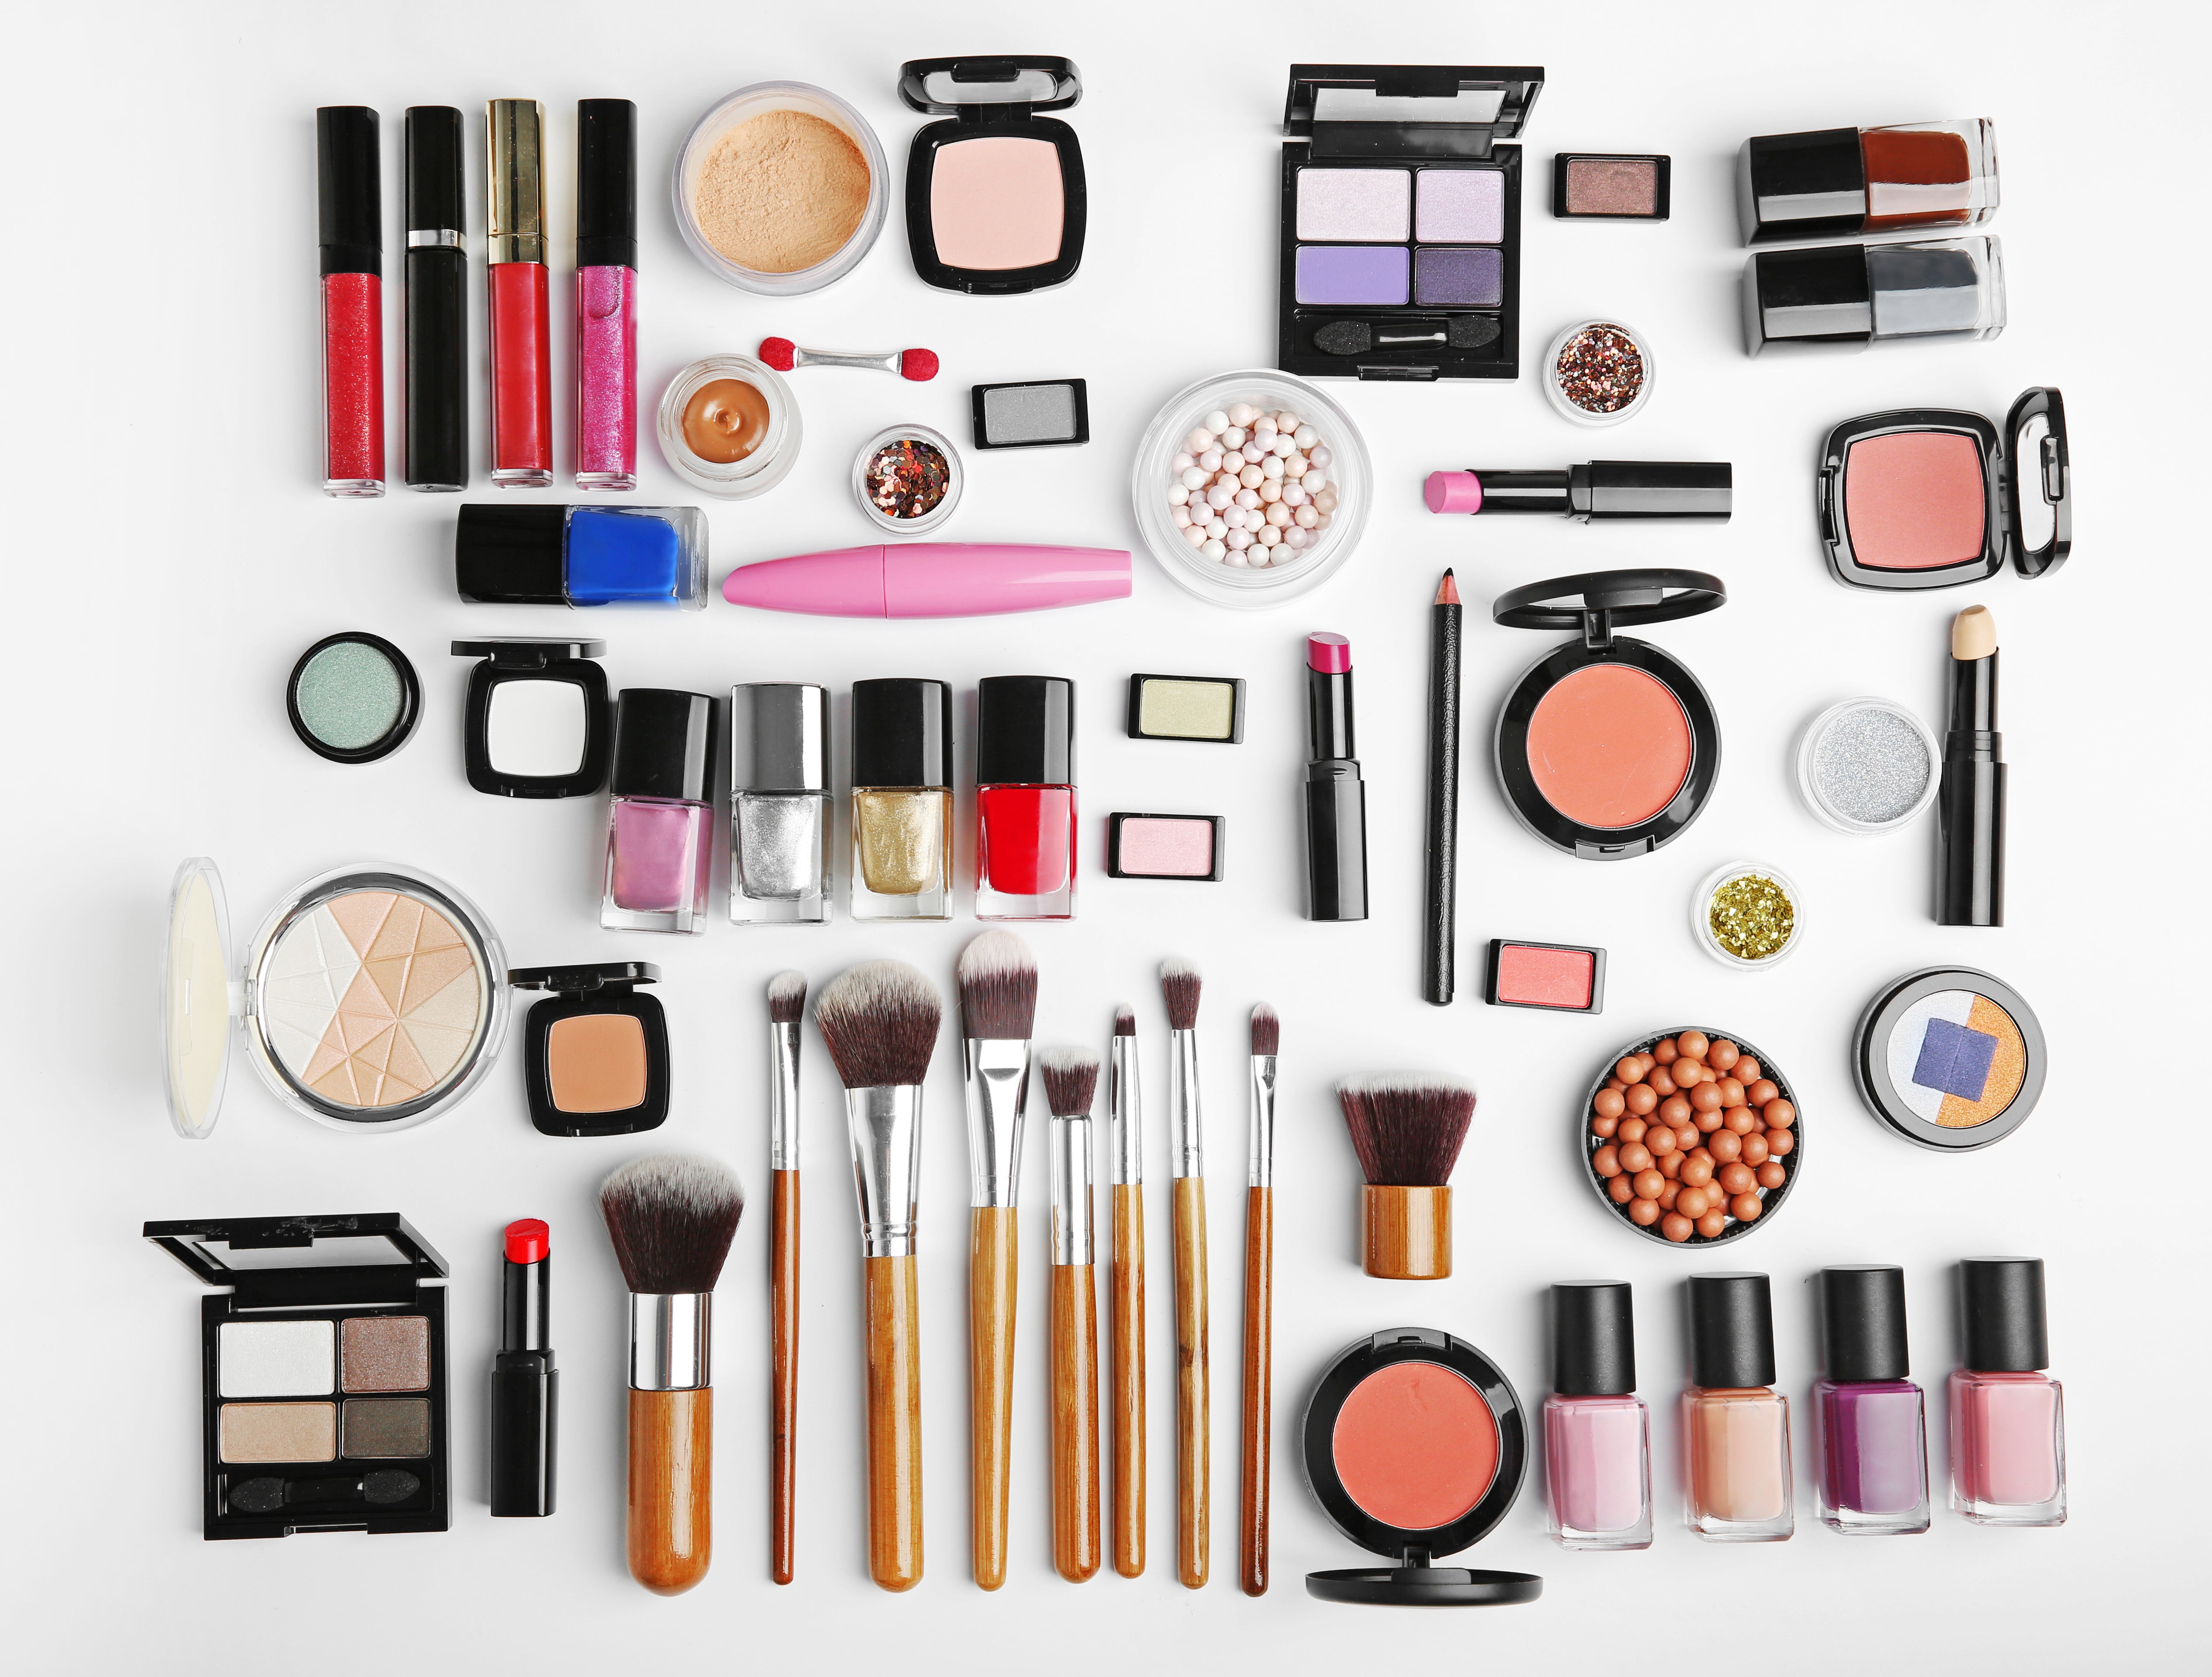 Flat-lay stock image of makeup categorized by type